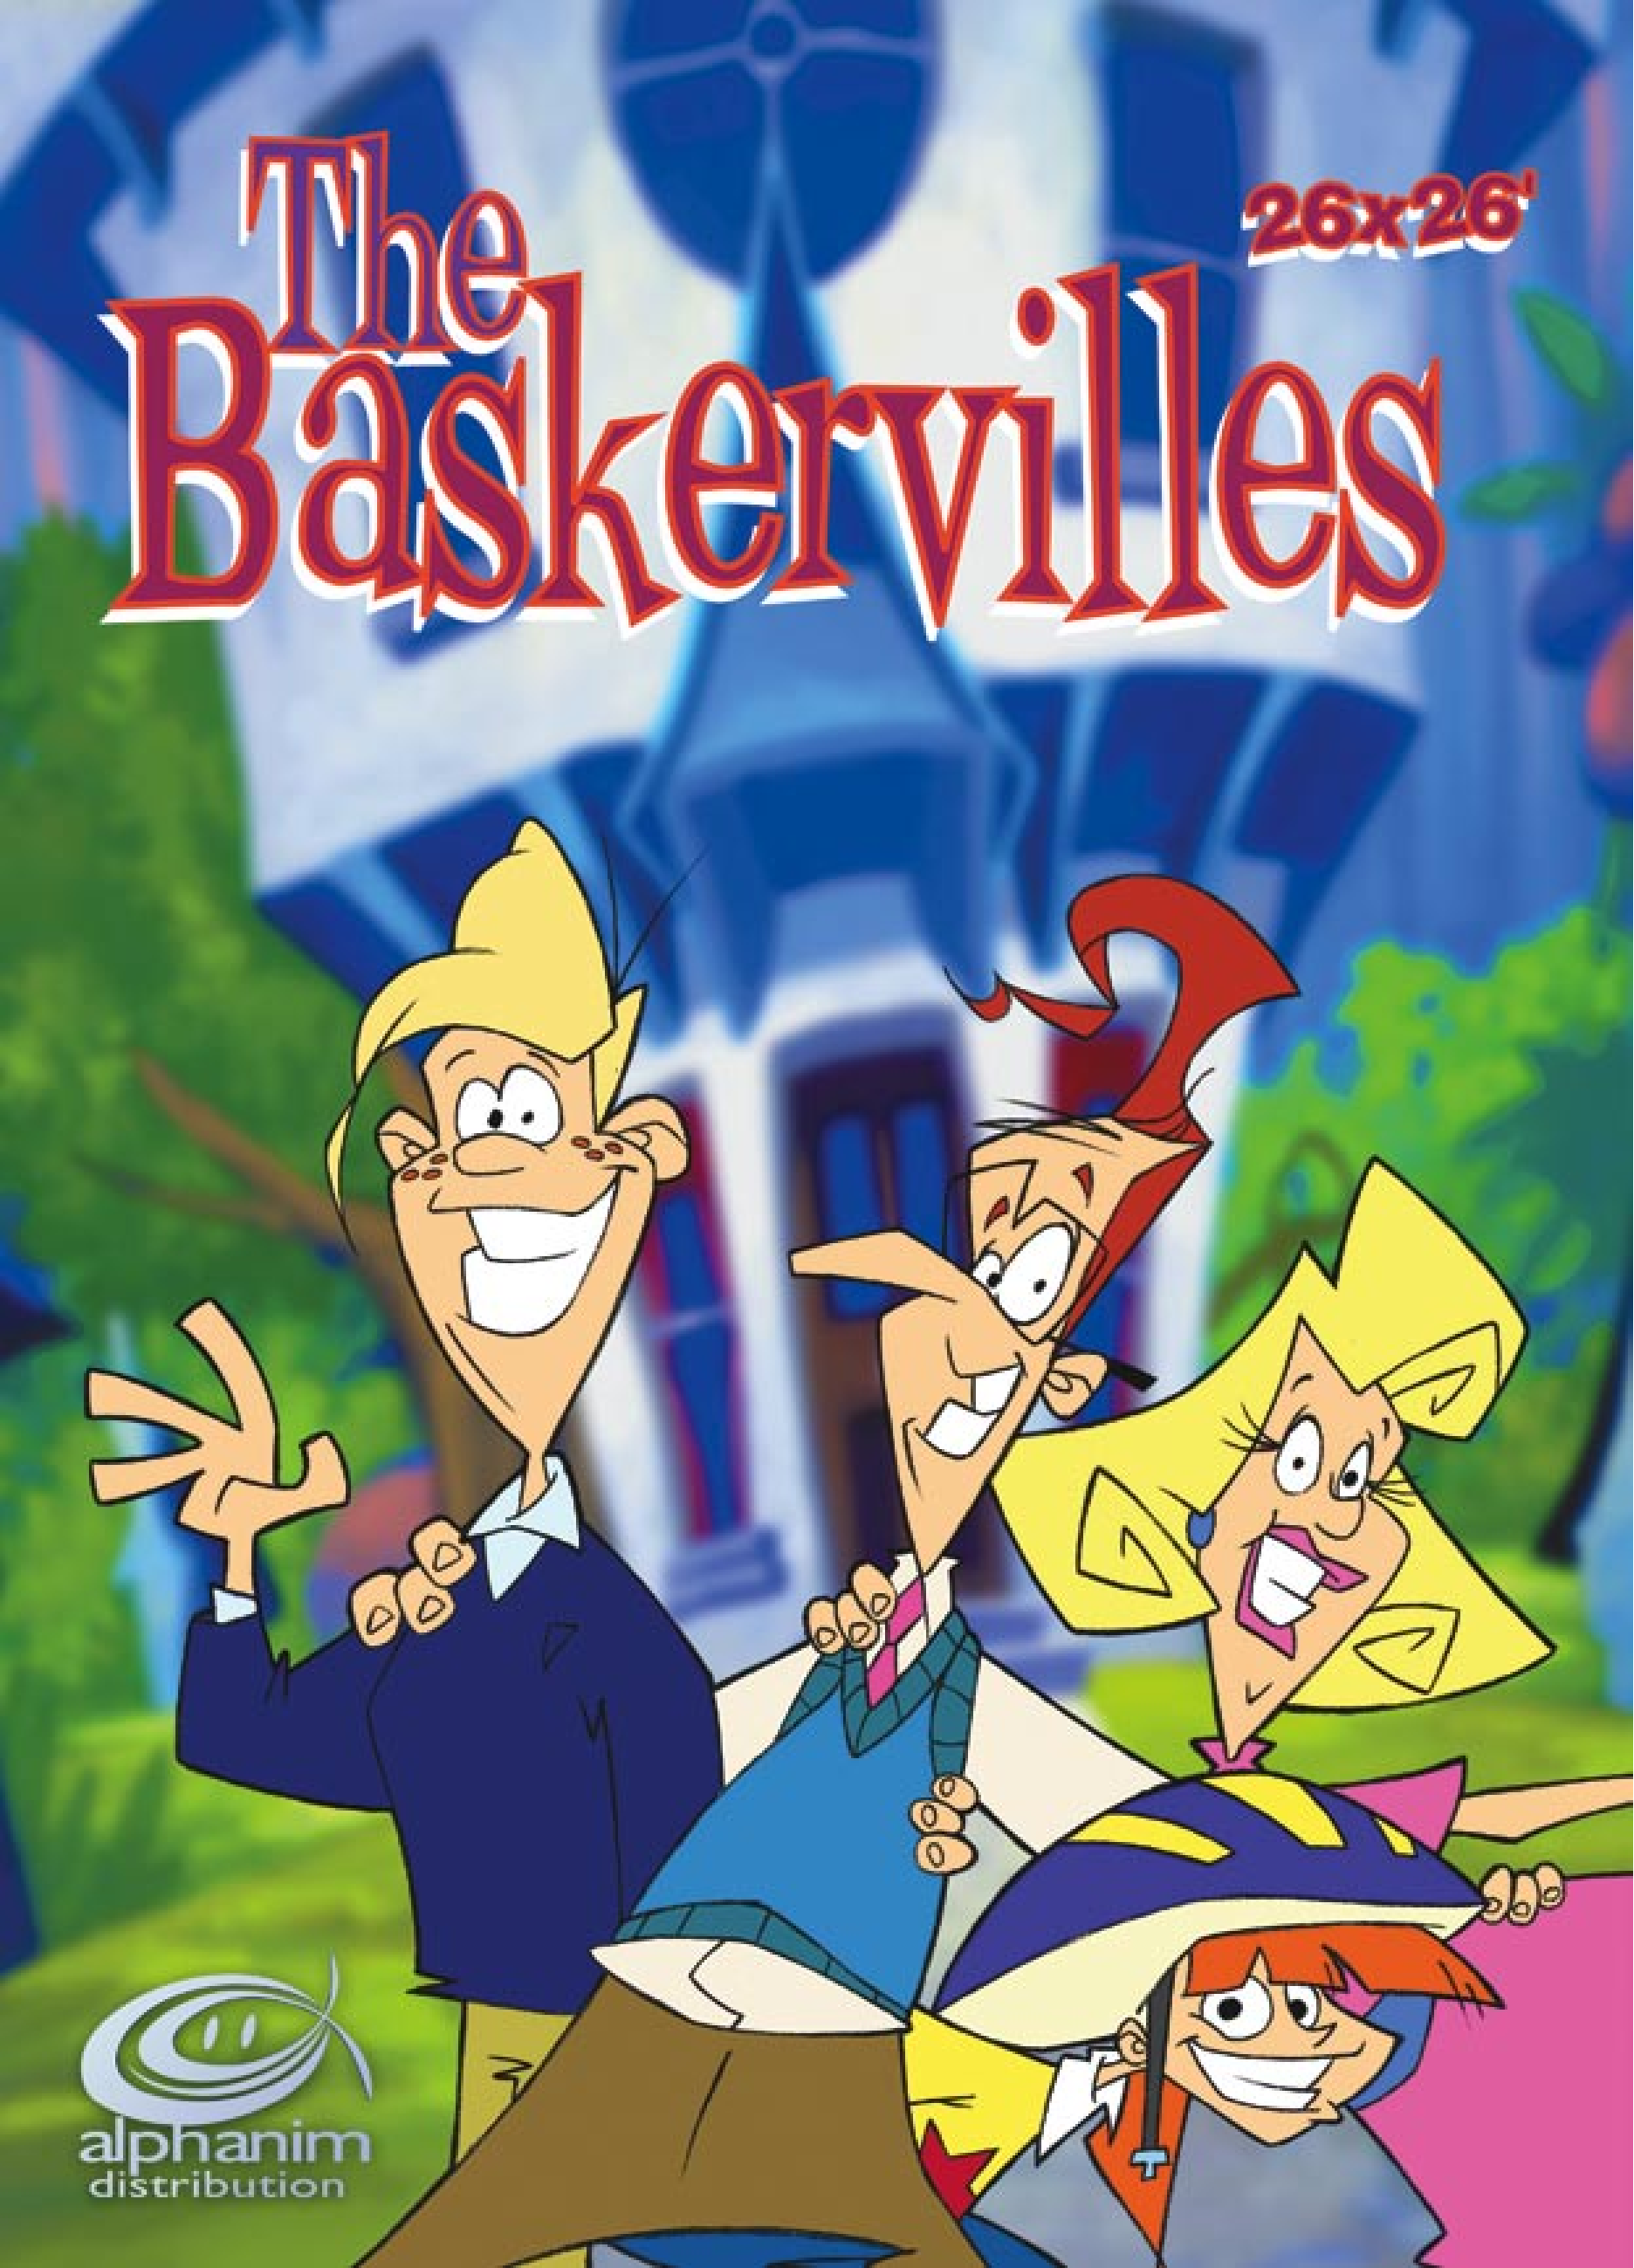 The Baskervilles Episode 25 Scarlet Pimple in English - The Baskervilles (partially found animated series; 2000)